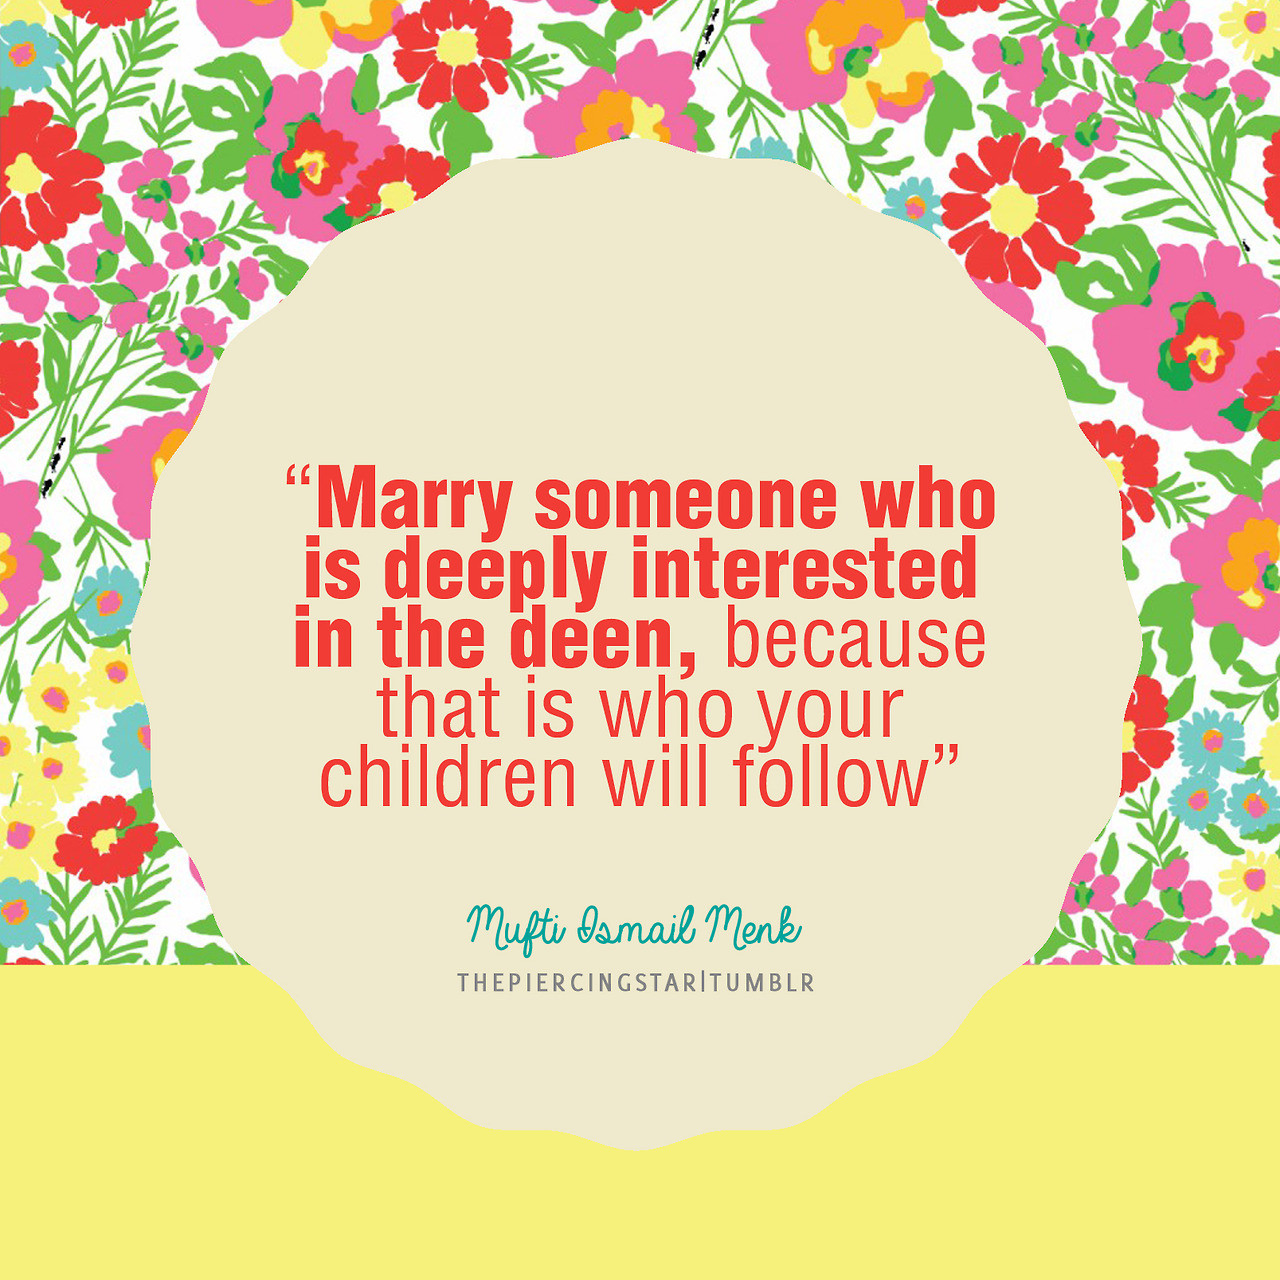 Quran Marriage Quotes
 Marriage Quotes From The Quran QuotesGram